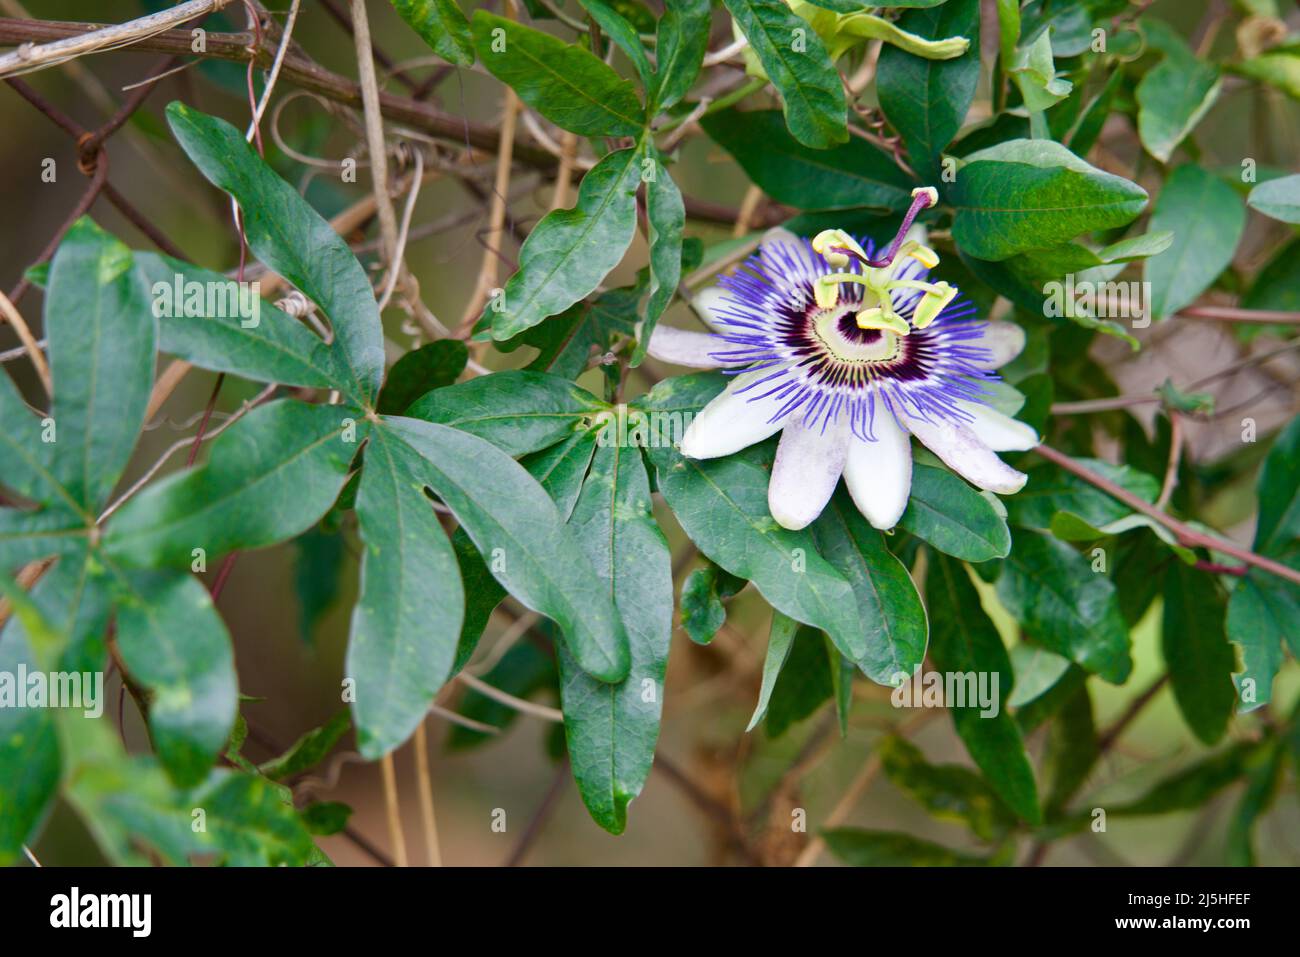 Close-up view of a passion flower blossom Stock Photo